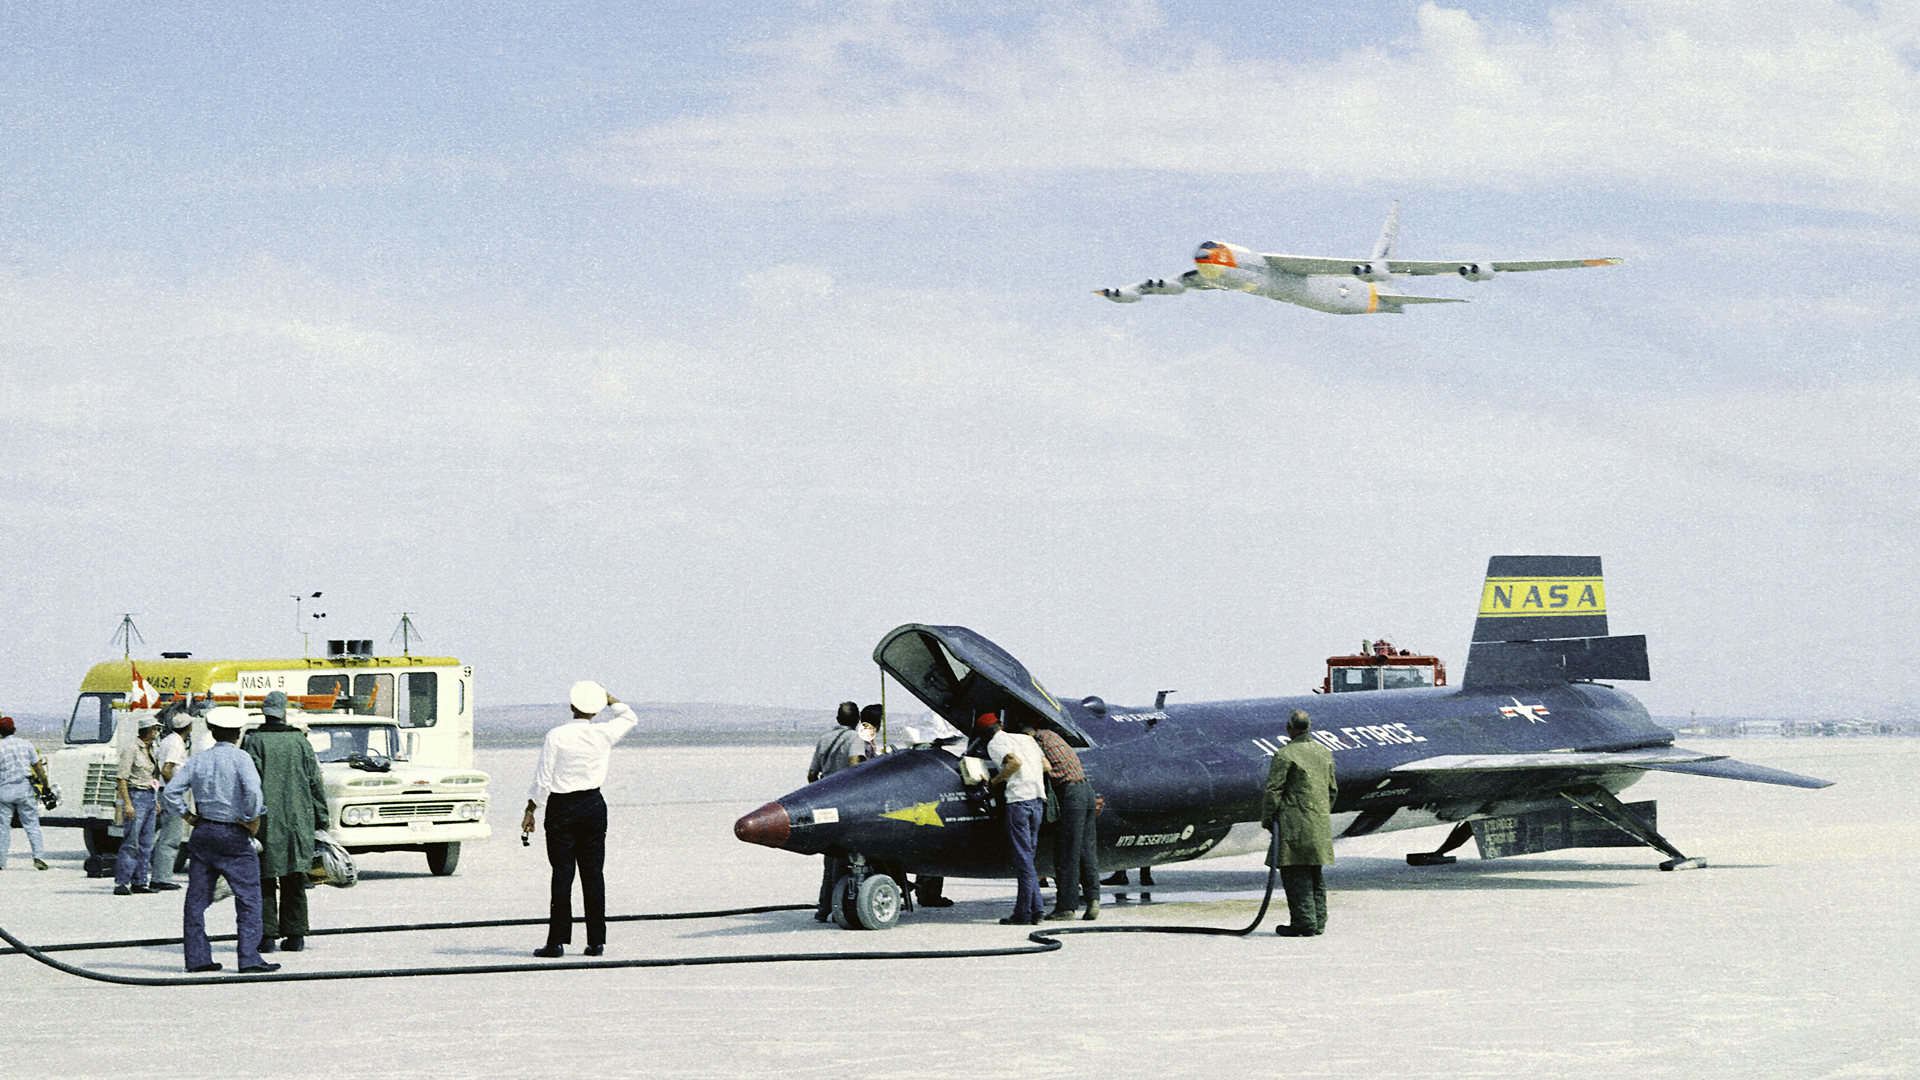 As crew members secure the X-15 rocket-powered aircraft after a research flight, the B-52 mothership flies overhead.